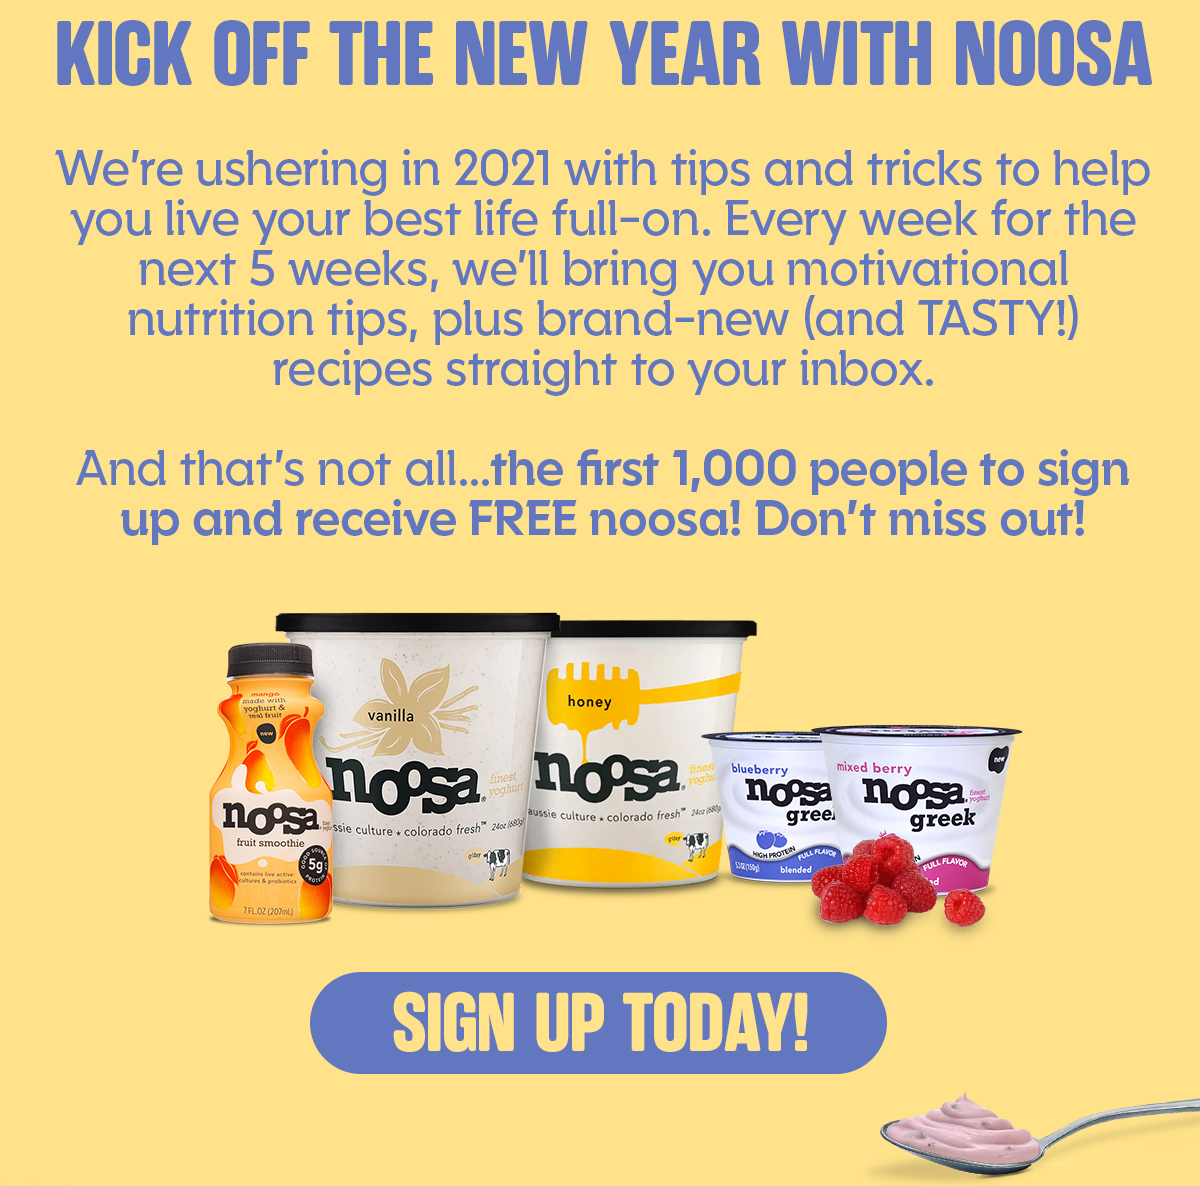 KICK OFF THE NEW YEAR WITH NOOSA  We're ushering in 2021 with tips and tricks to help you live your best life full-on. Every week for the next 5 weeks, we'll bring you motivational nutrition tips, plus brand-new (and TASTY!) recipes straight to your inbox.  And that's not all...the first 1,000 people to sign up and receive FREE noosa! Don't miss out! SIGN UP TODAY!